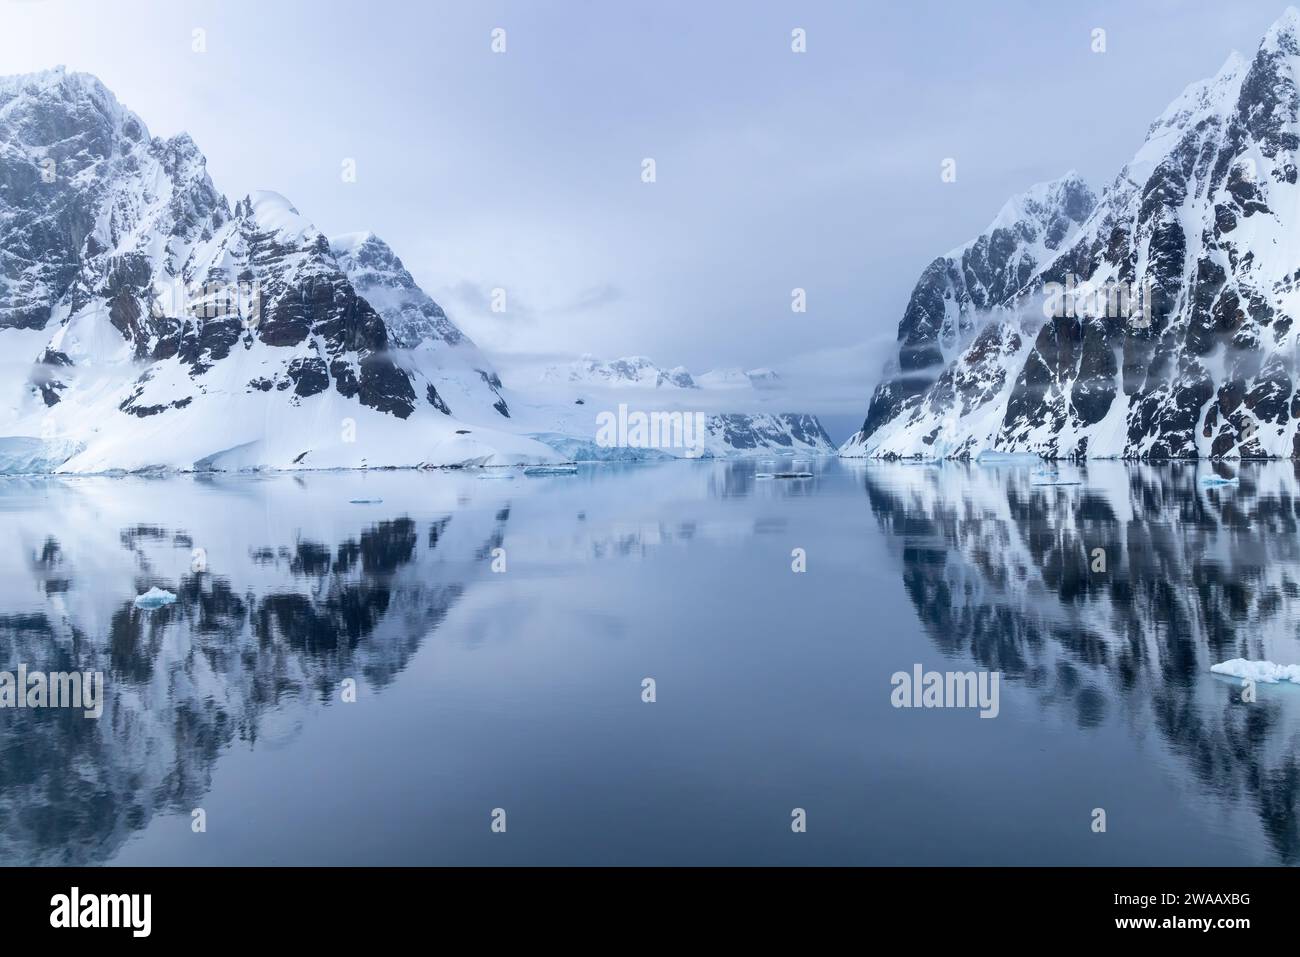 Lamaire Channel in Antartica. Stock Photo